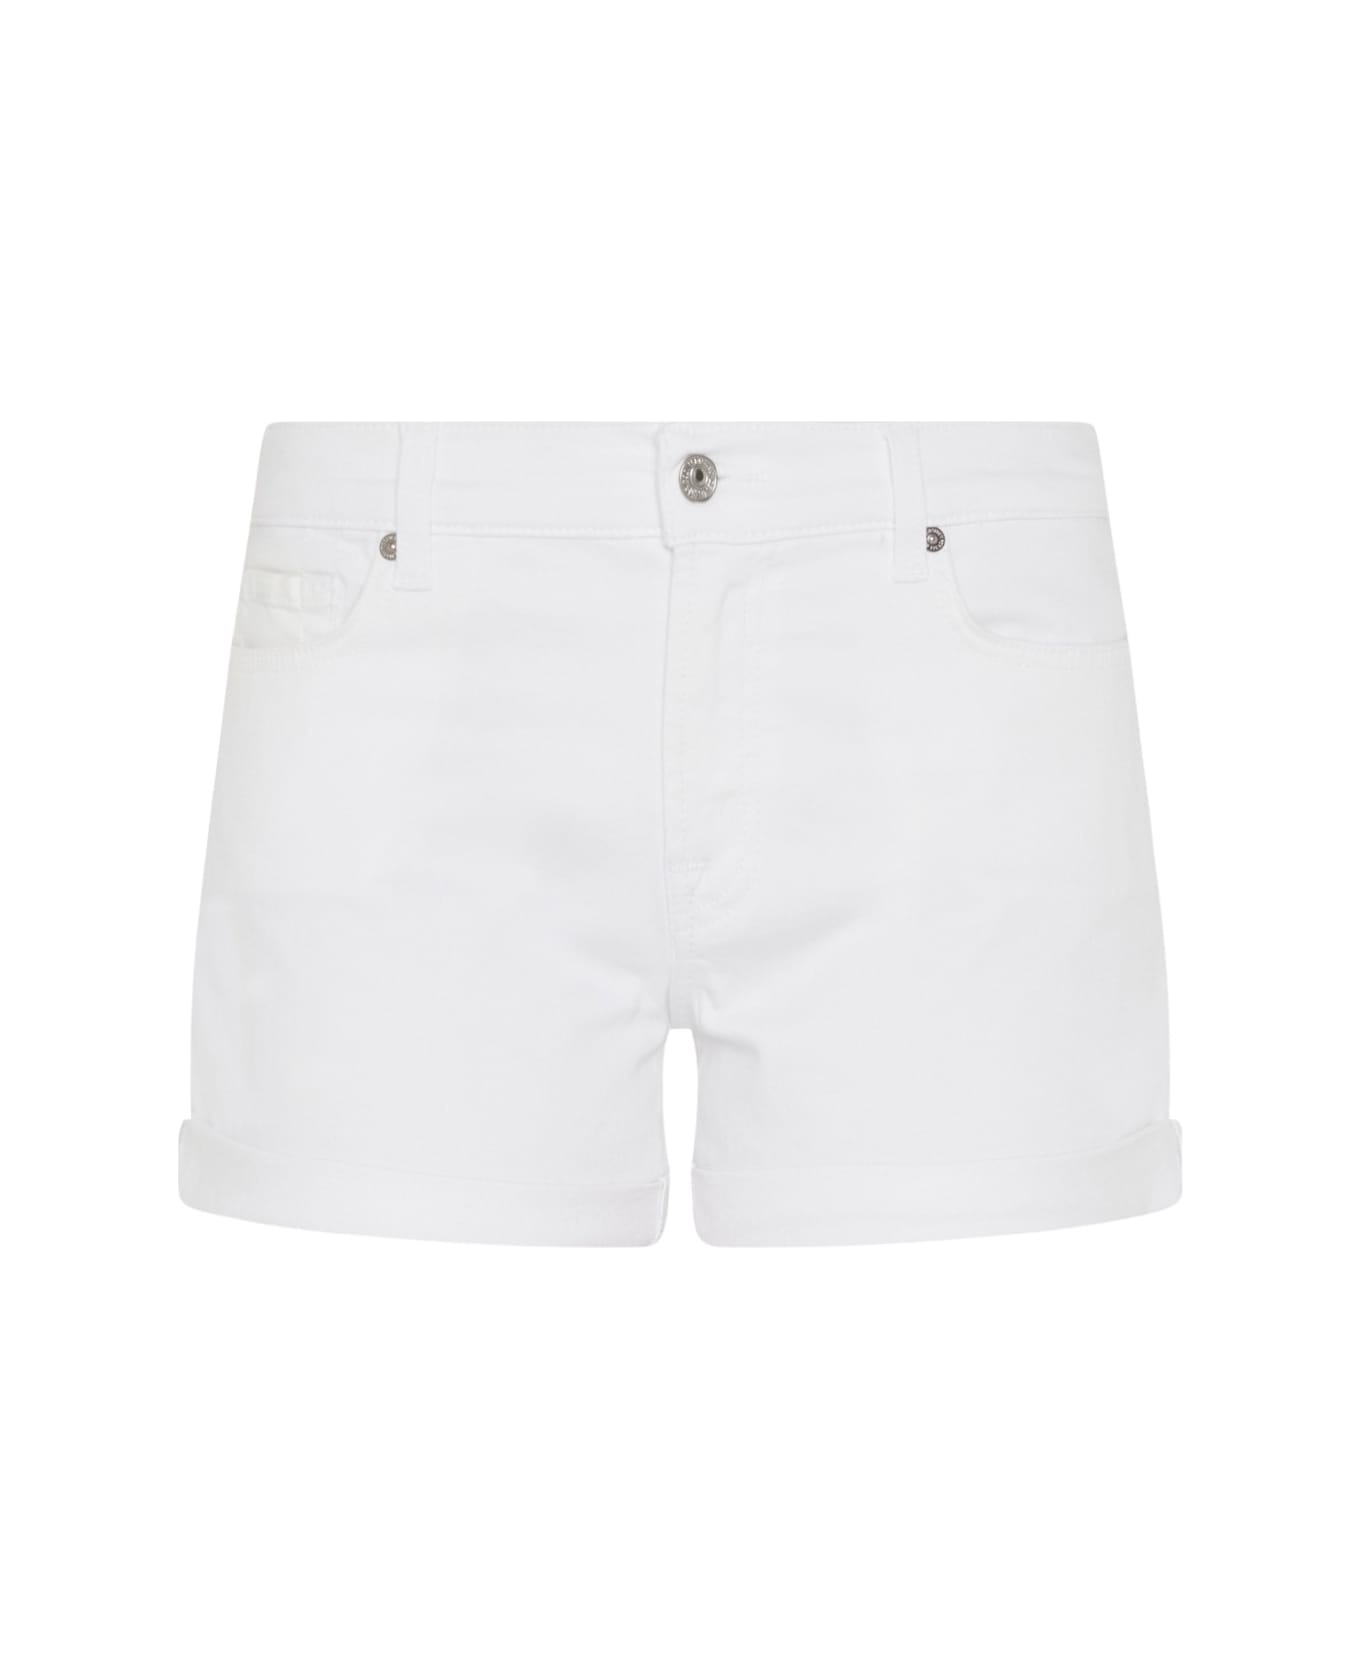 7 For All Mankind Mid Roll Shorts - White